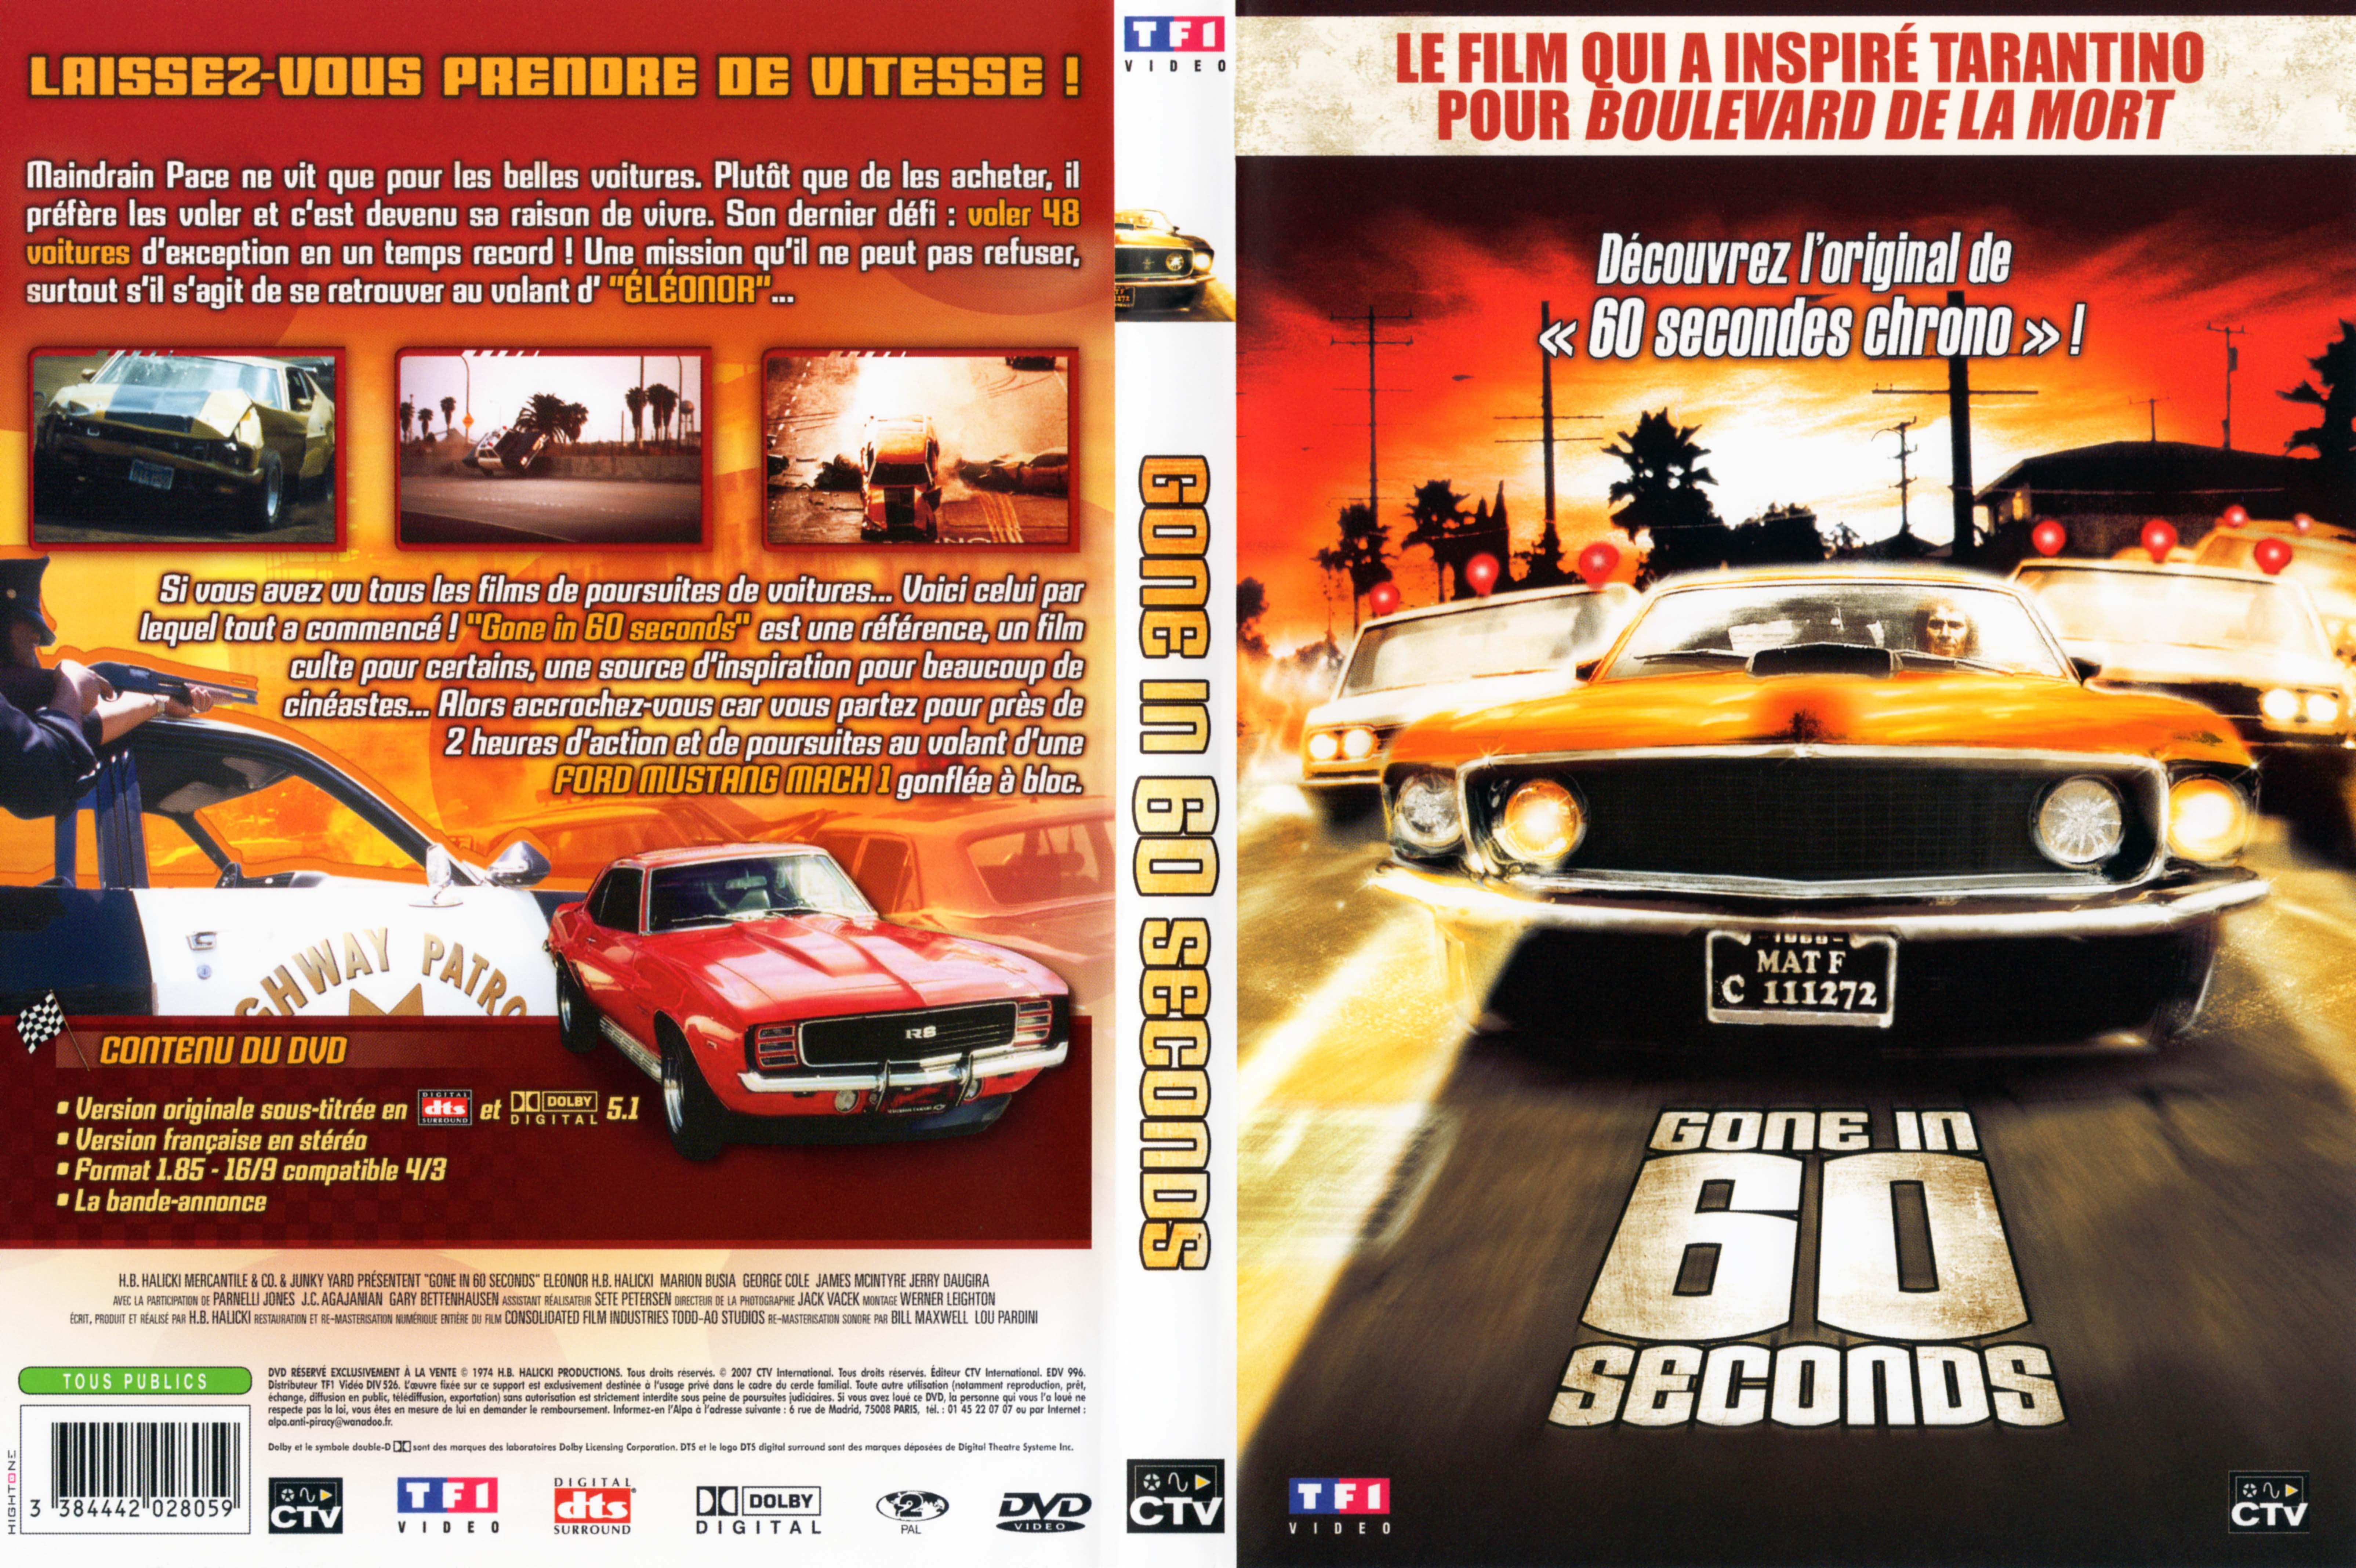 Jaquette DVD Gone in 60 seconds